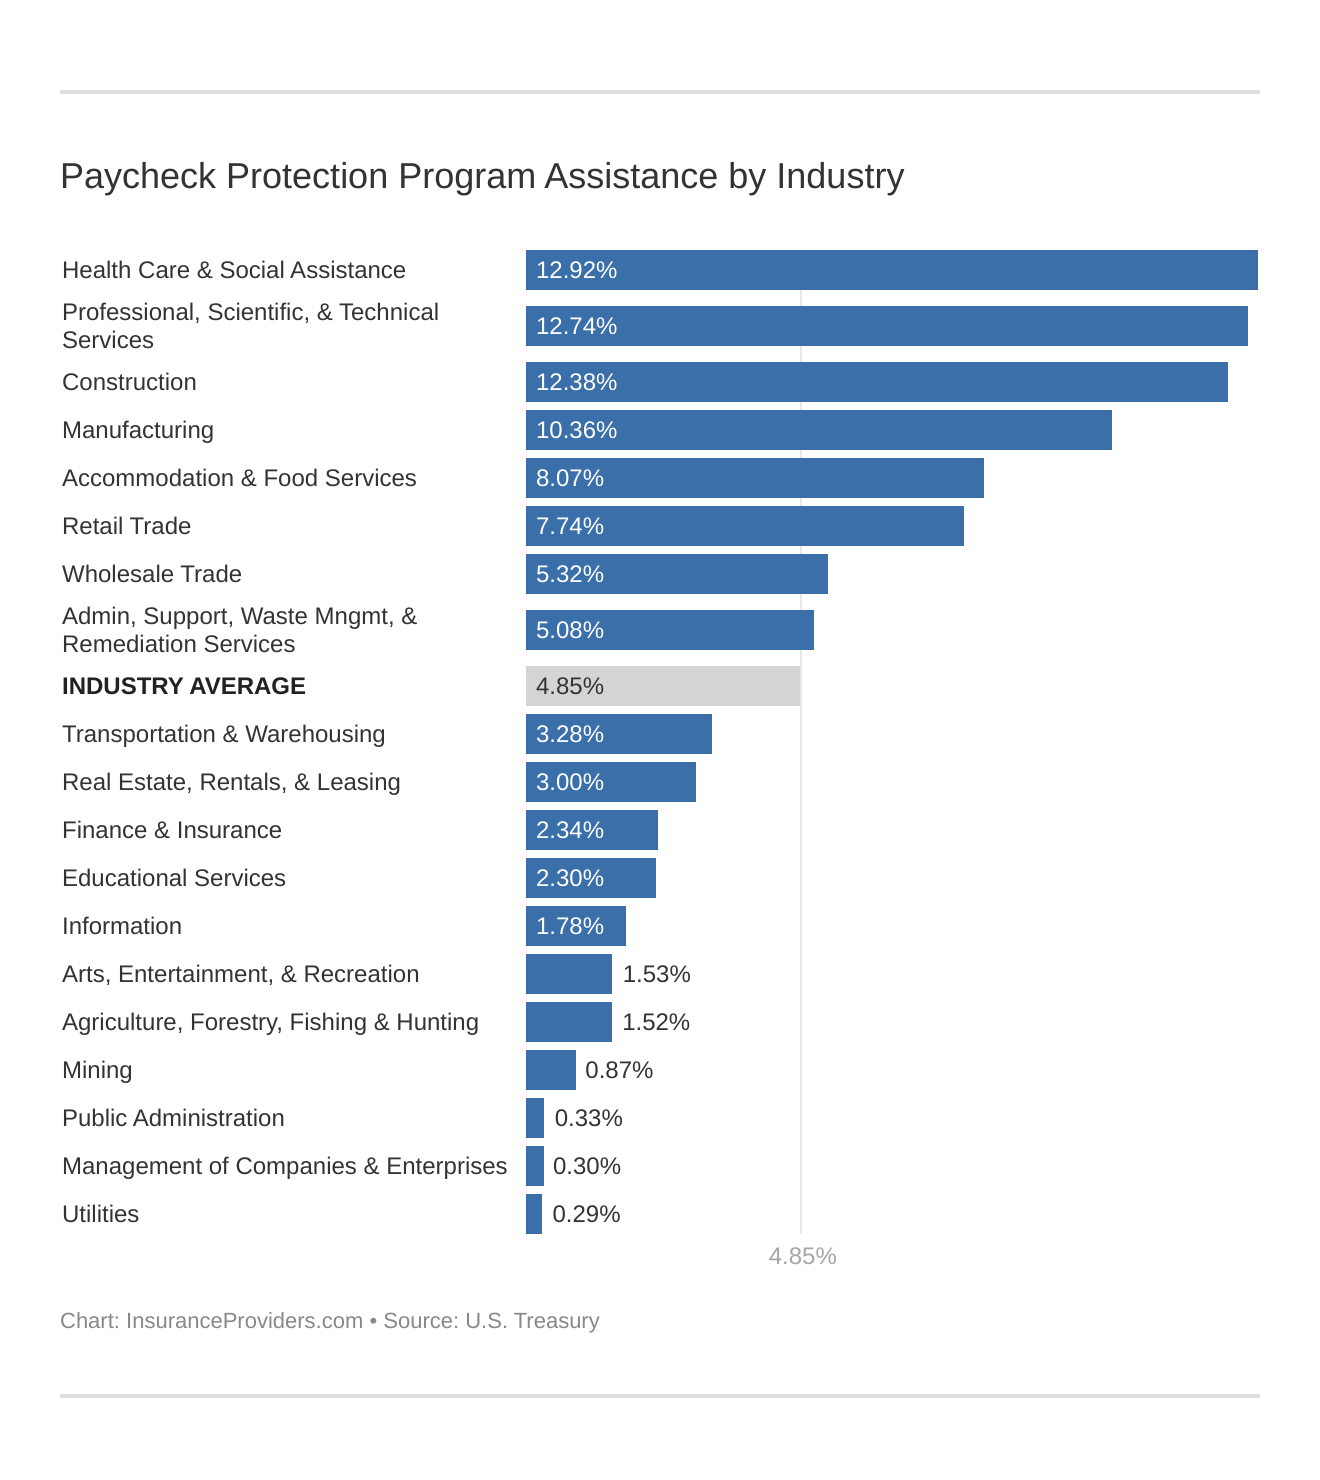 Paycheck Protection Program Assistance by Industry